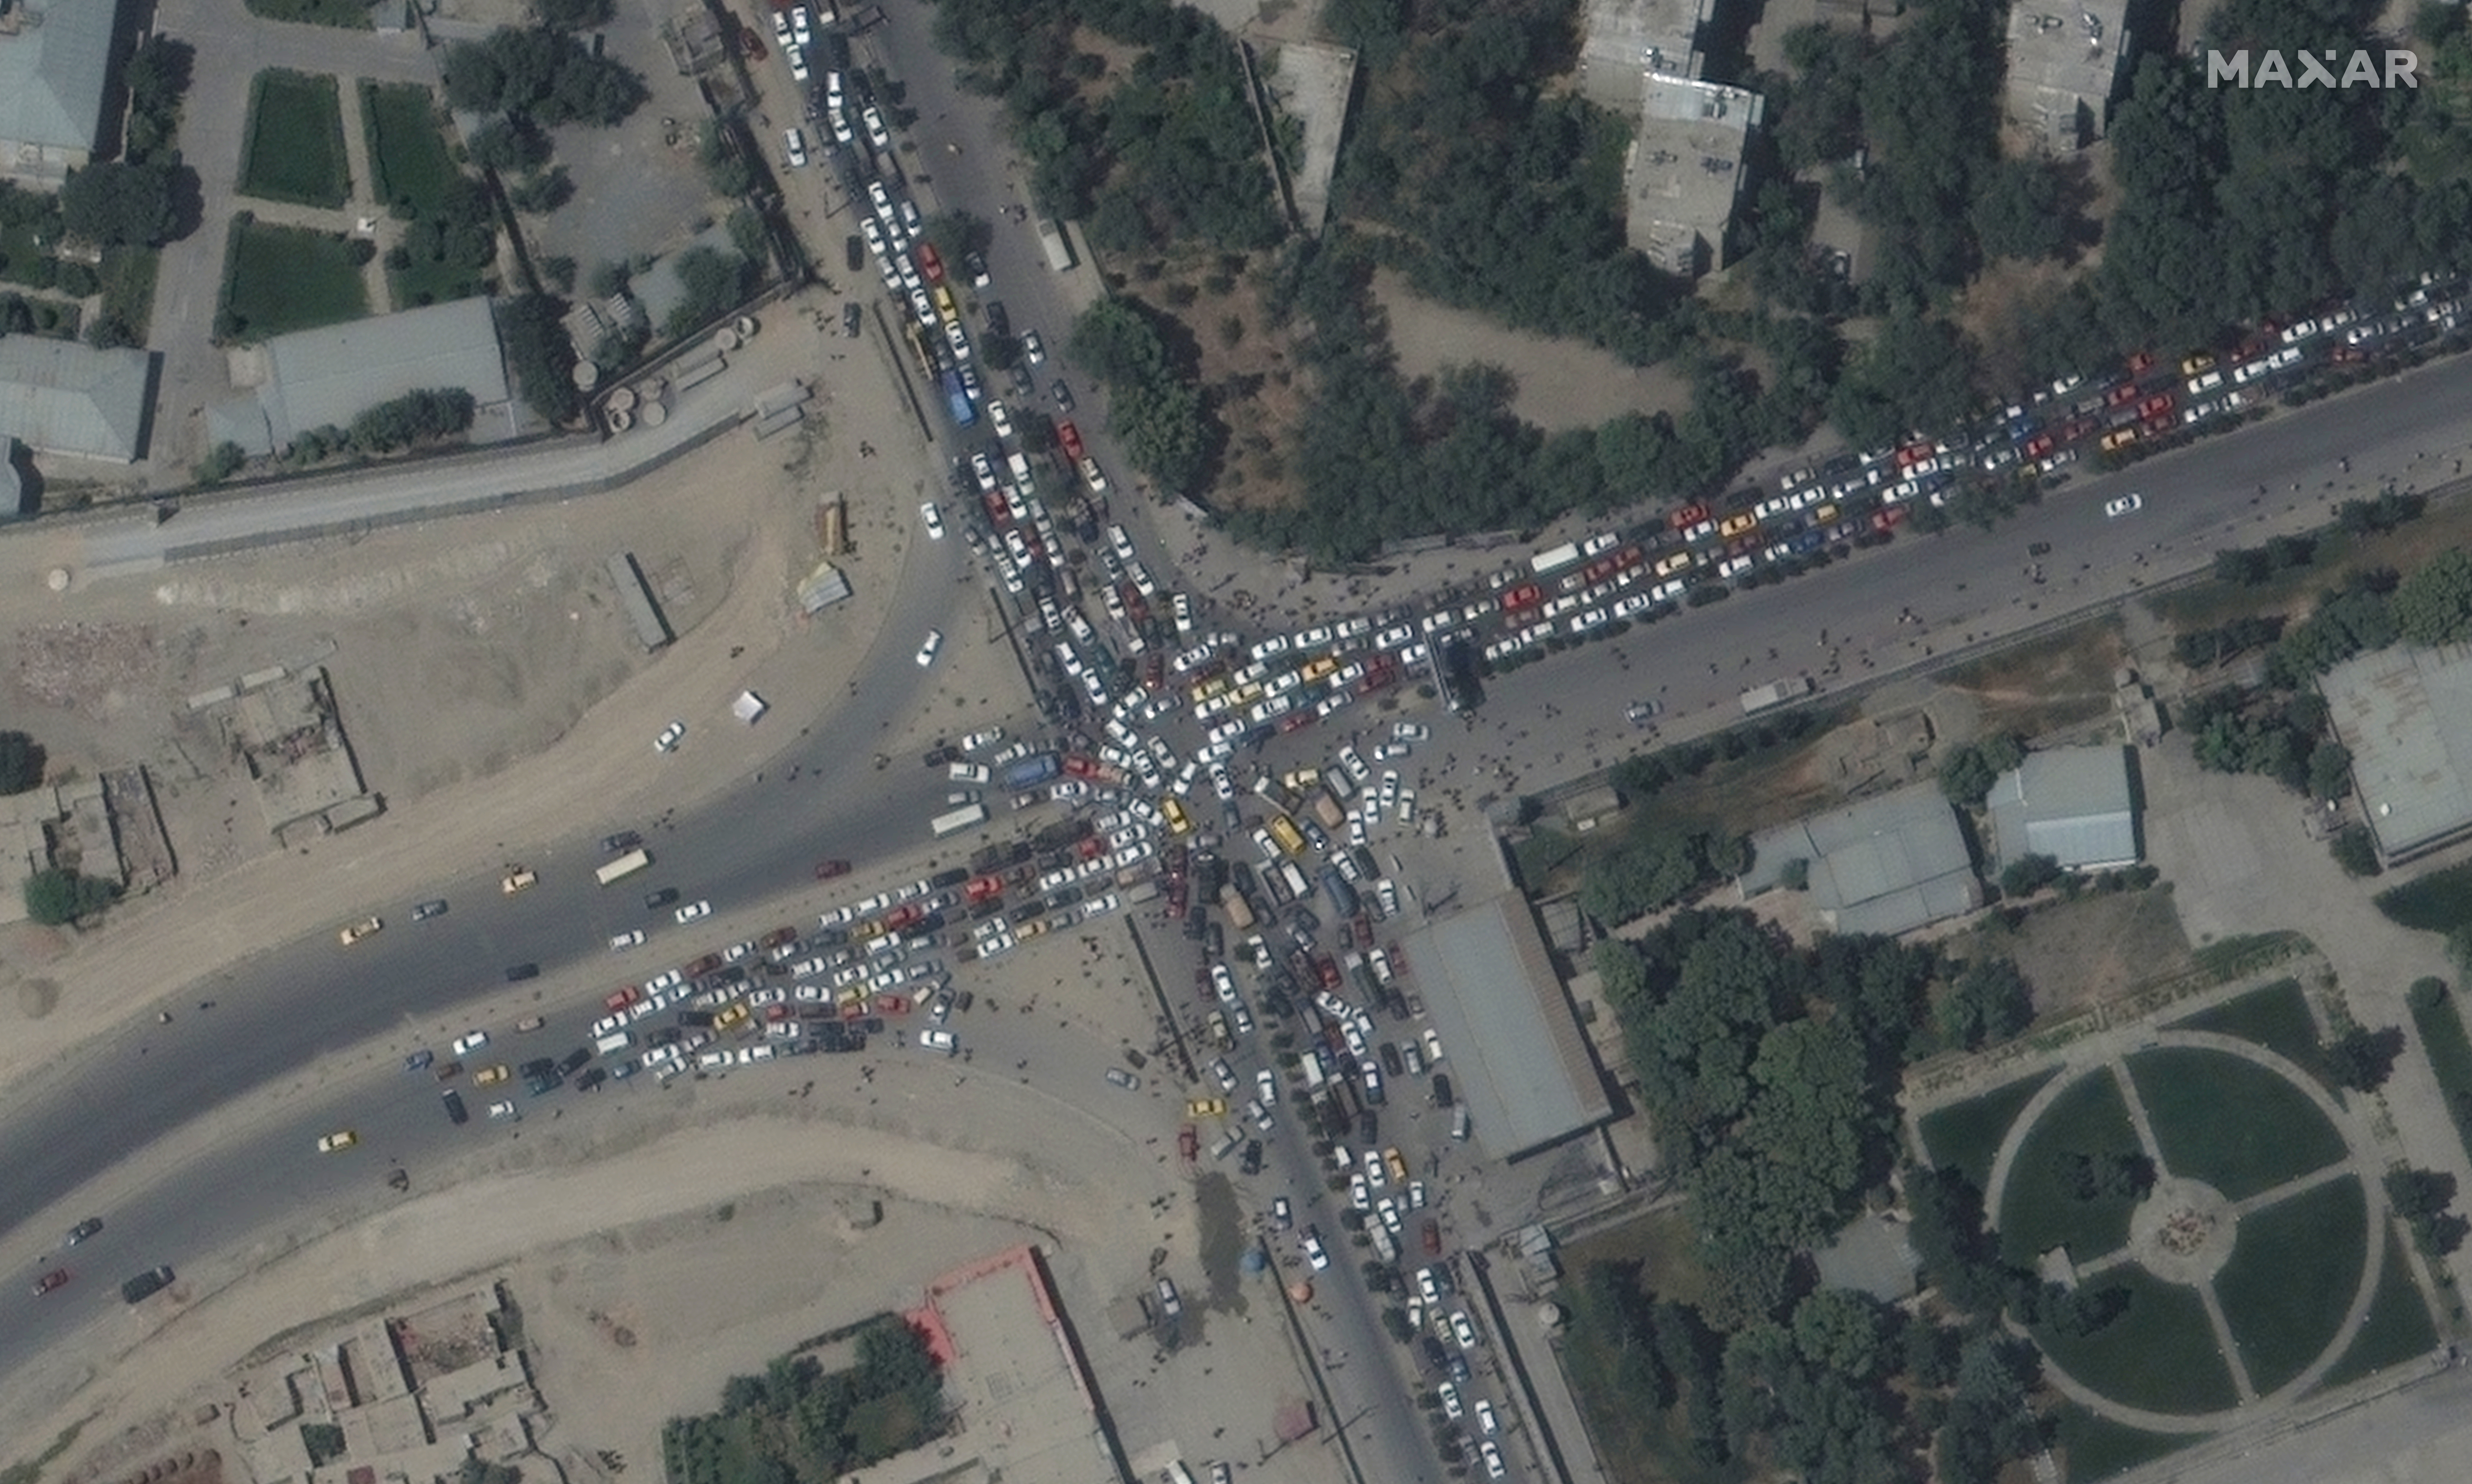 Traffic jam and crowds are seen near Kabul's airport in Afghanistan August 16, 2021.  MAXAR TECHNOLOGIES/via REUTERS